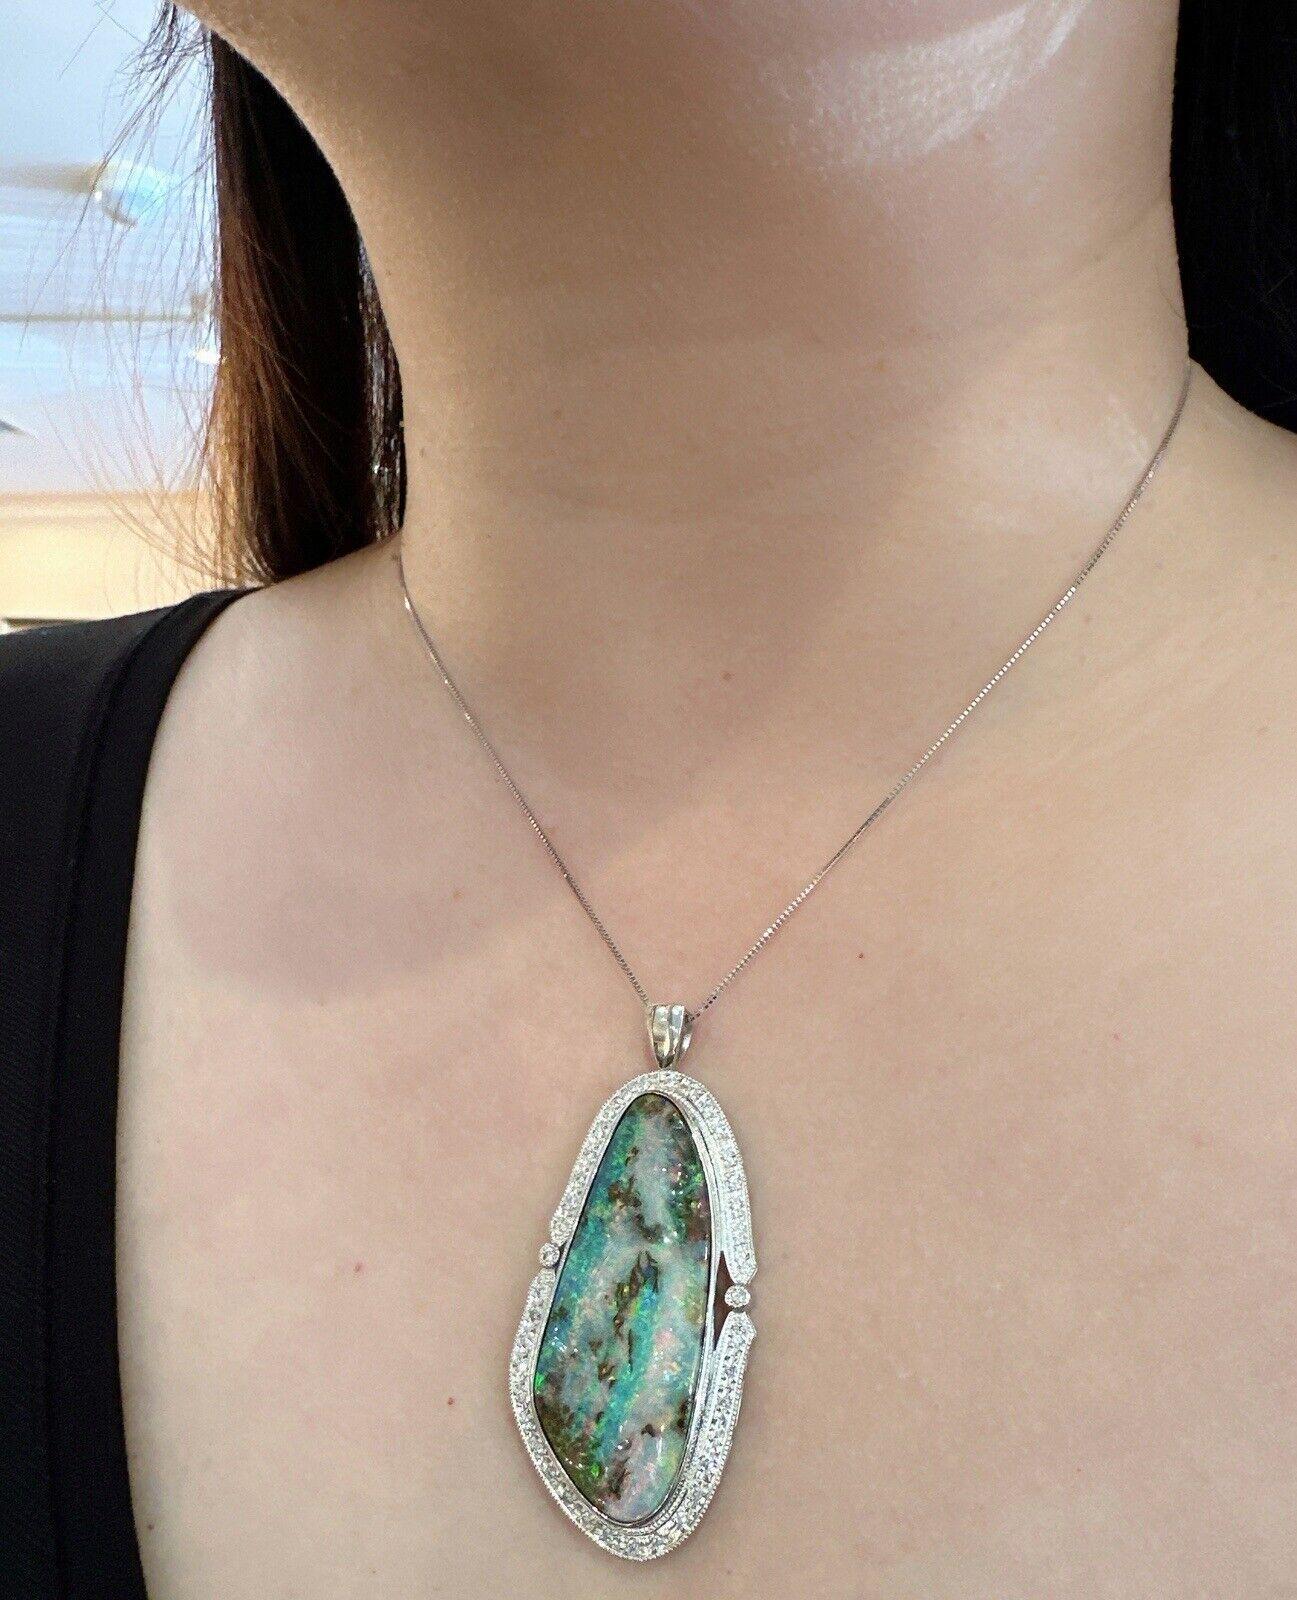 Large Boulder Opal and Diamond Pendant Necklace in Platinum 

Boulder Opal and Diamond Pendant features a 48.50 carat Boulder Opal with Natural Round Diamonds set in Platinum with a Platinum box chain.

Total opal weight is 48.50 carats.
Total